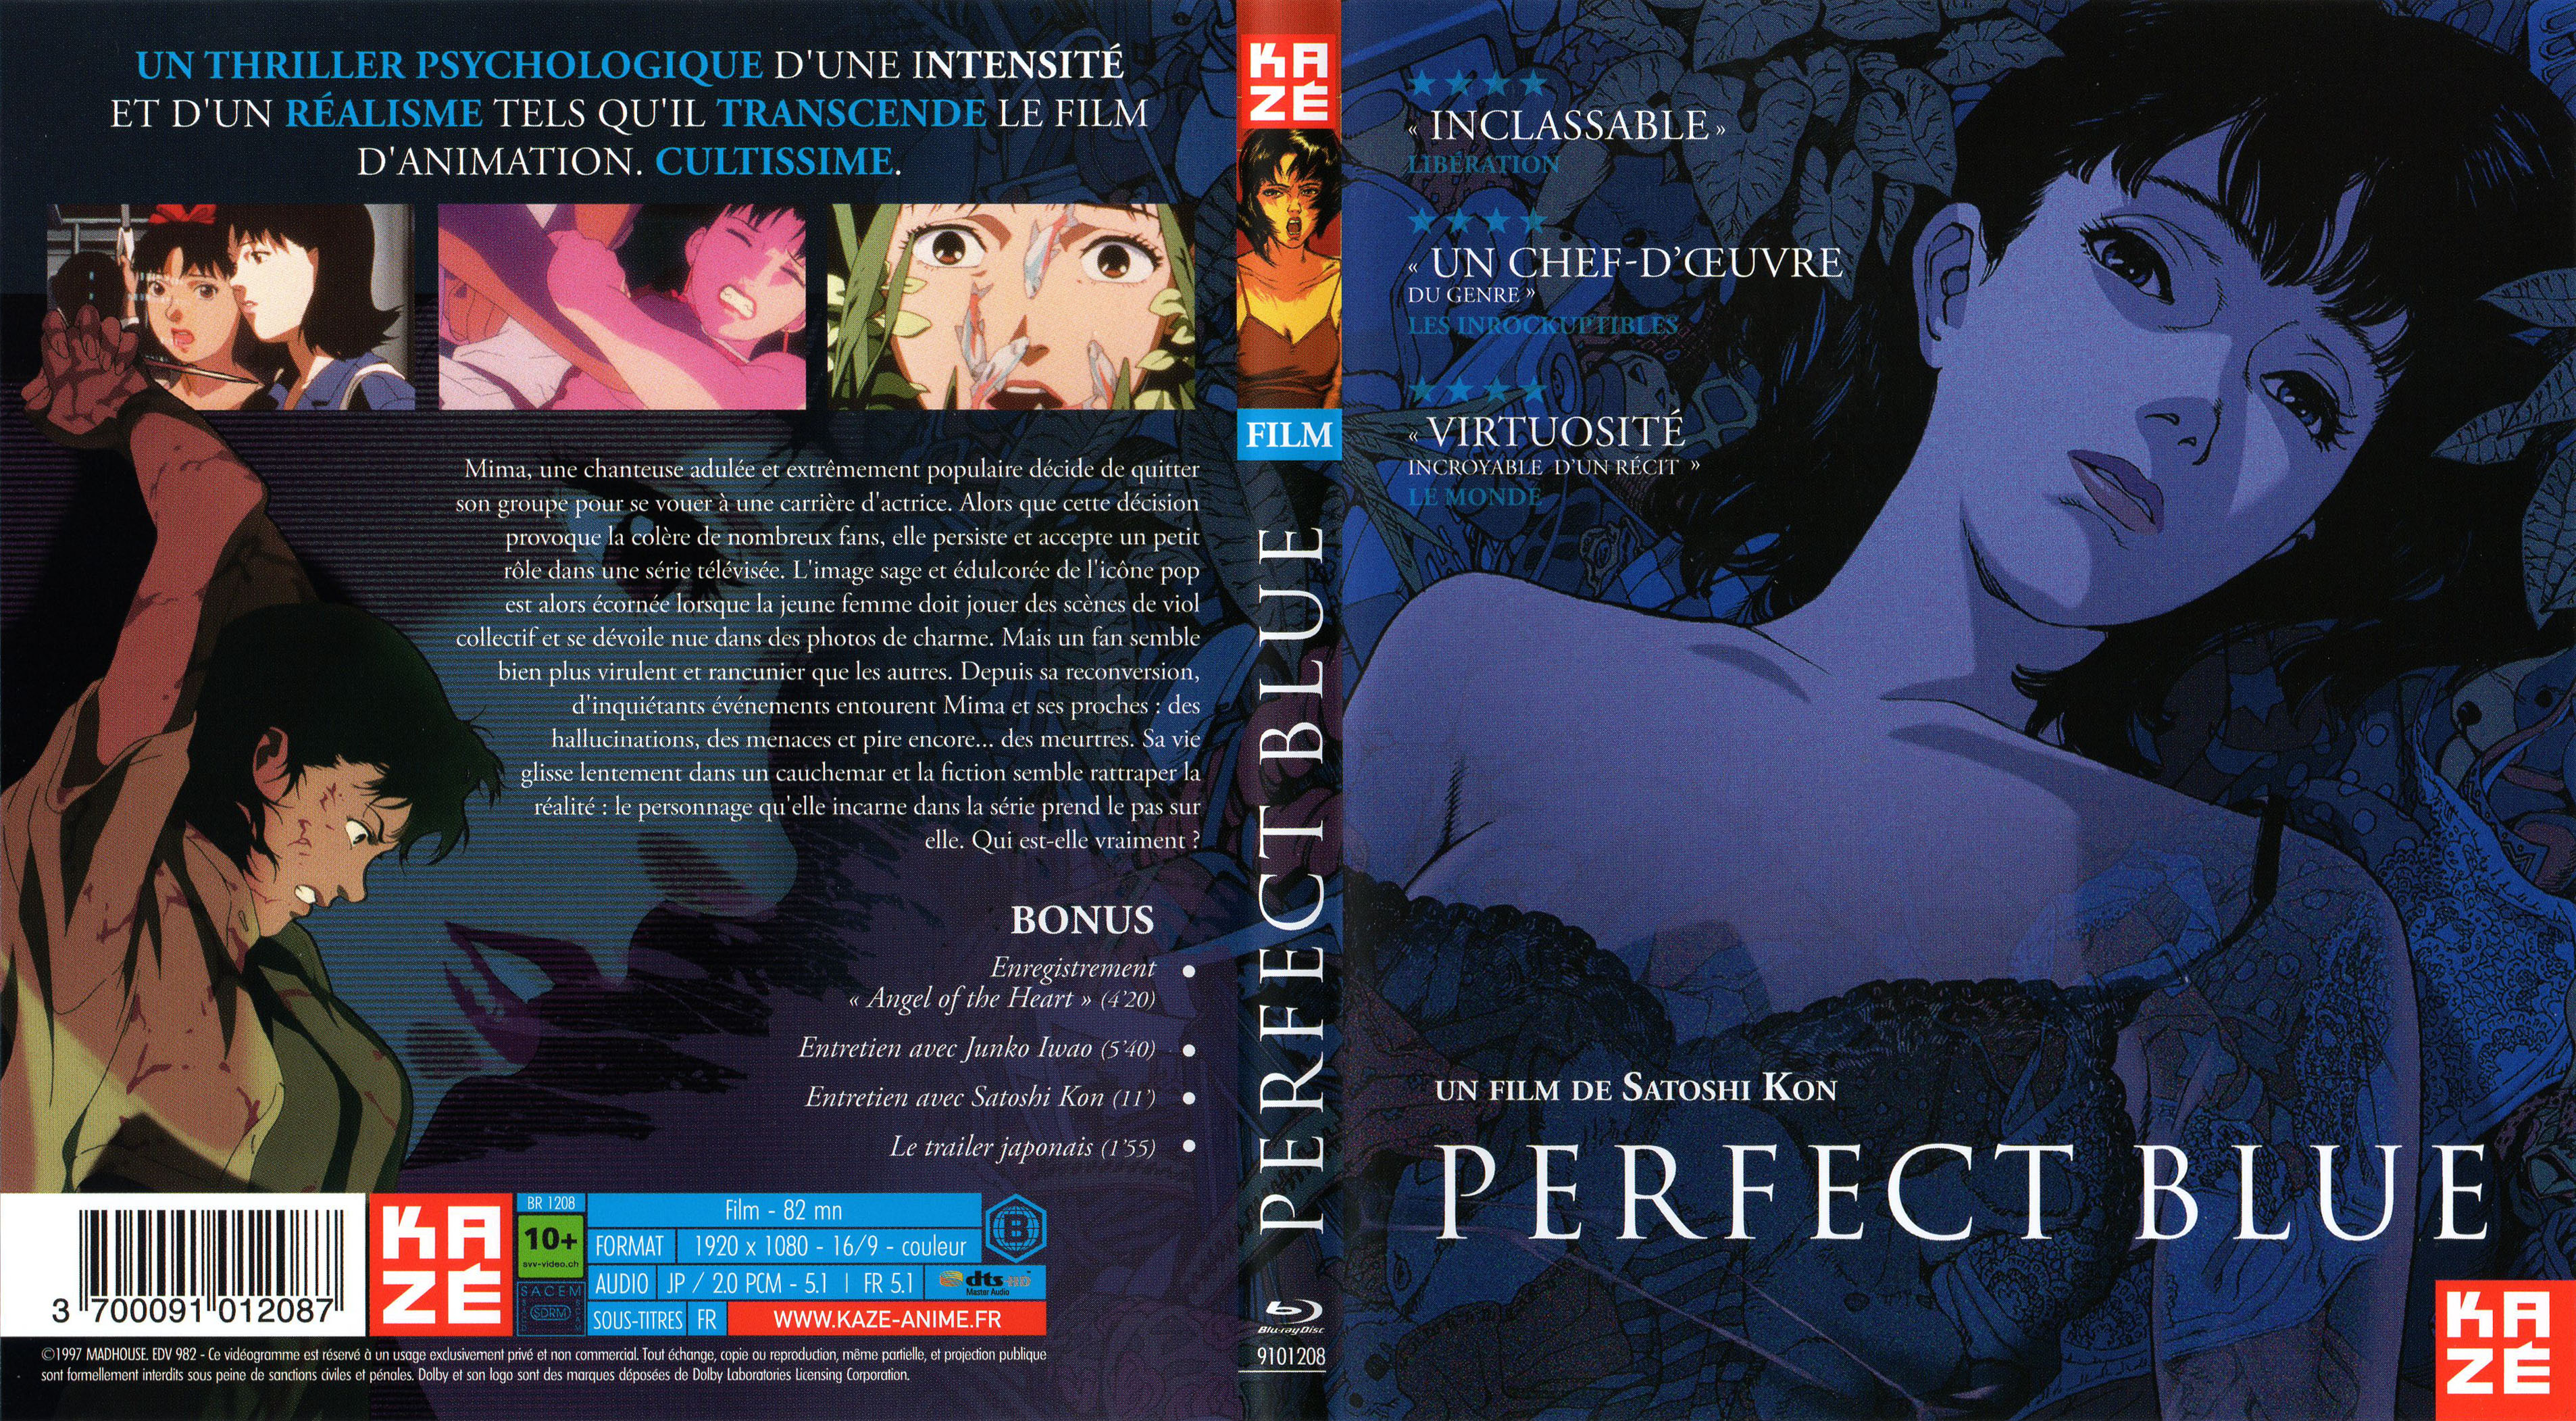 Jaquette DVD Perfect Blue (BLU-RAY)